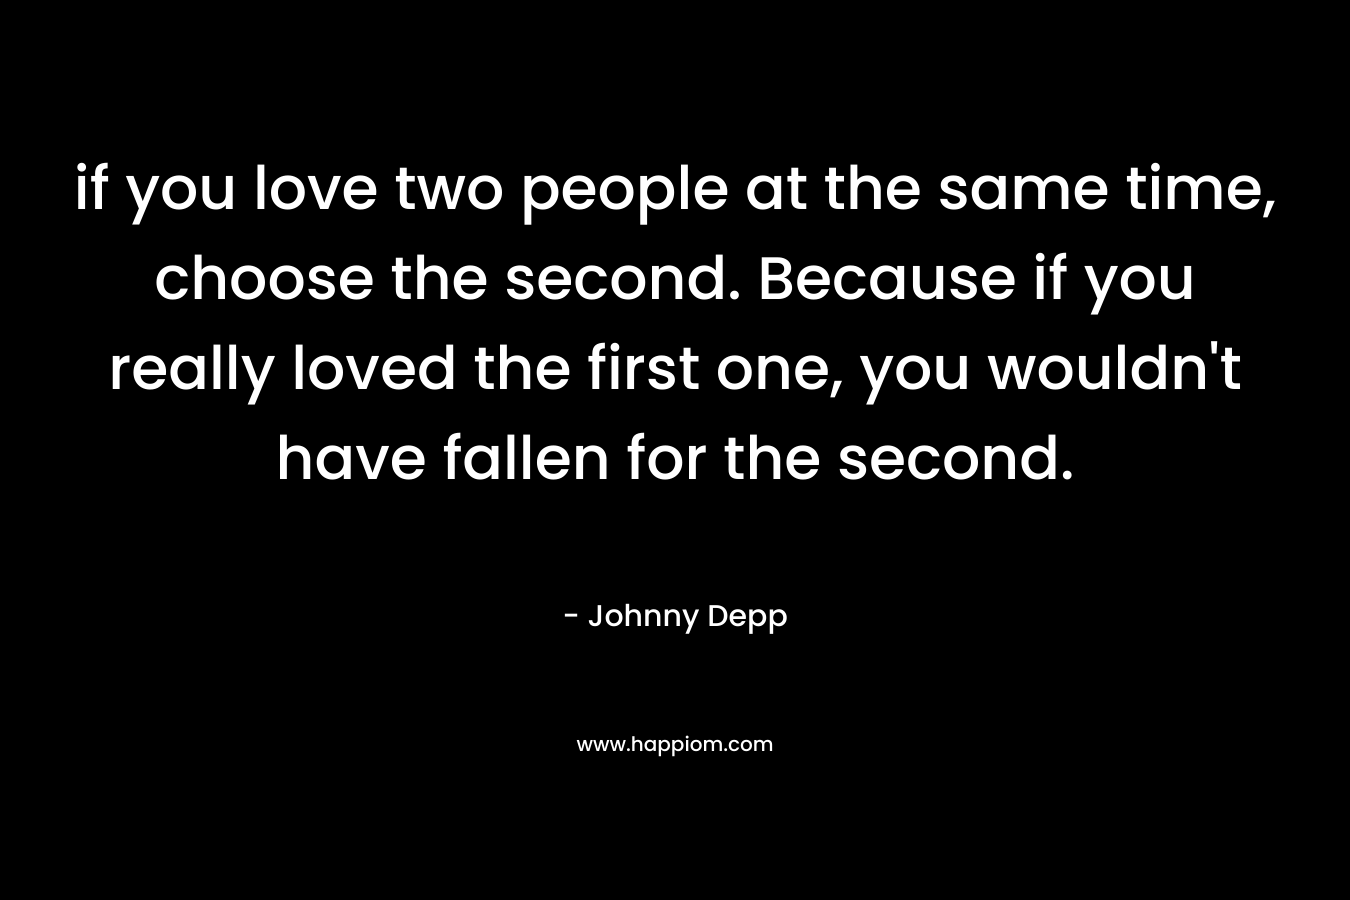 if you love two people at the same time, choose the second. Because if you really loved the first one, you wouldn't have fallen for the second.